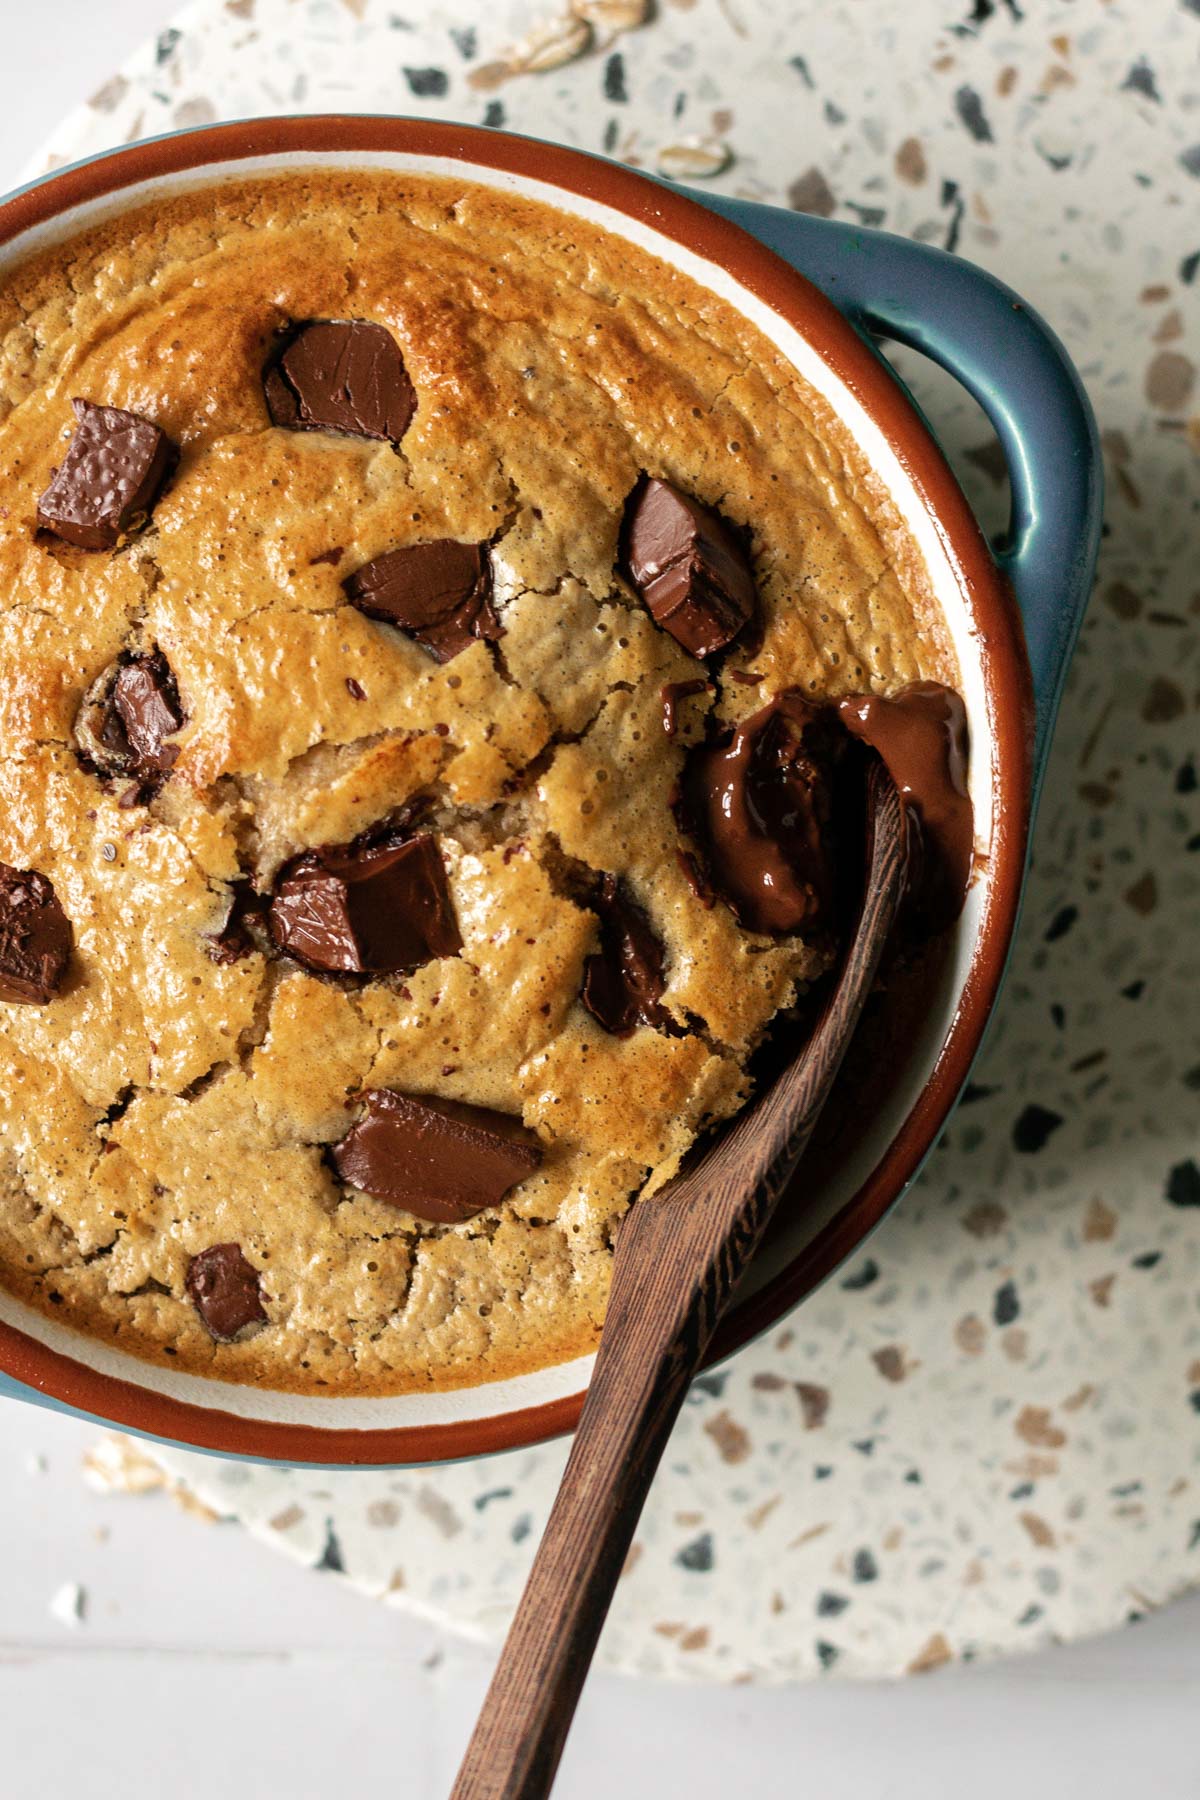 cakey baked oats with chocolate on top